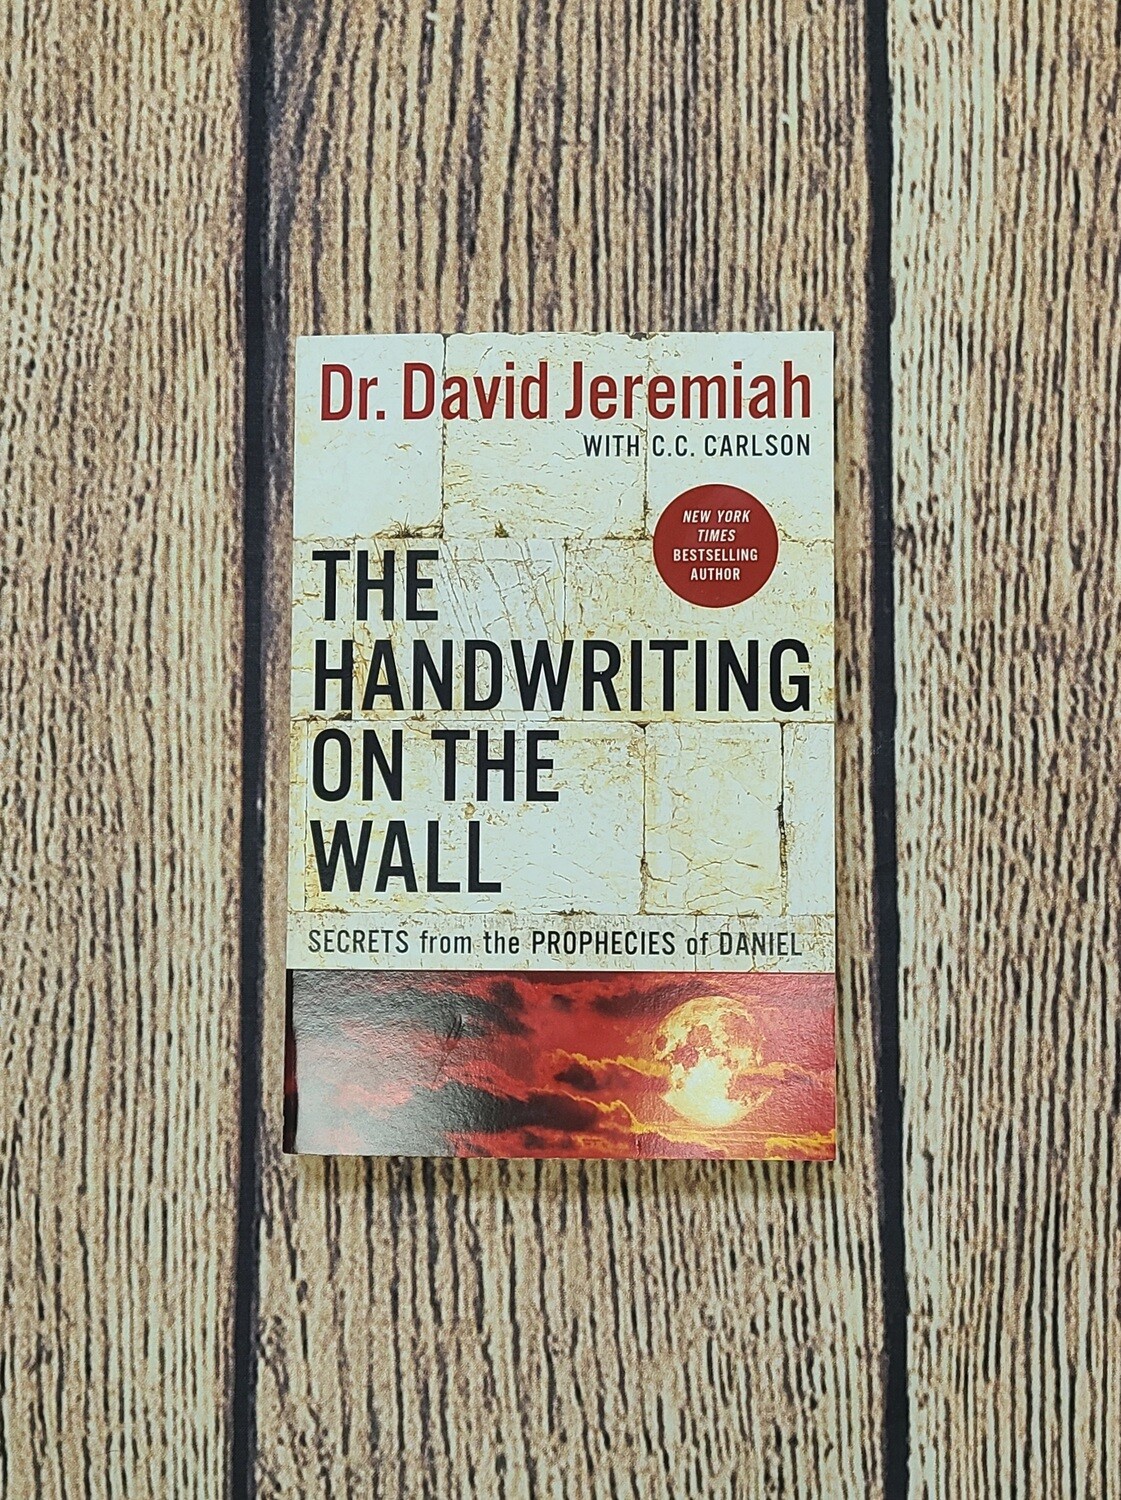 The Handwriting on the Wall: Secrets from the Prophecies of Daniel by Dr. David Jeremiah with C. C. Carlson